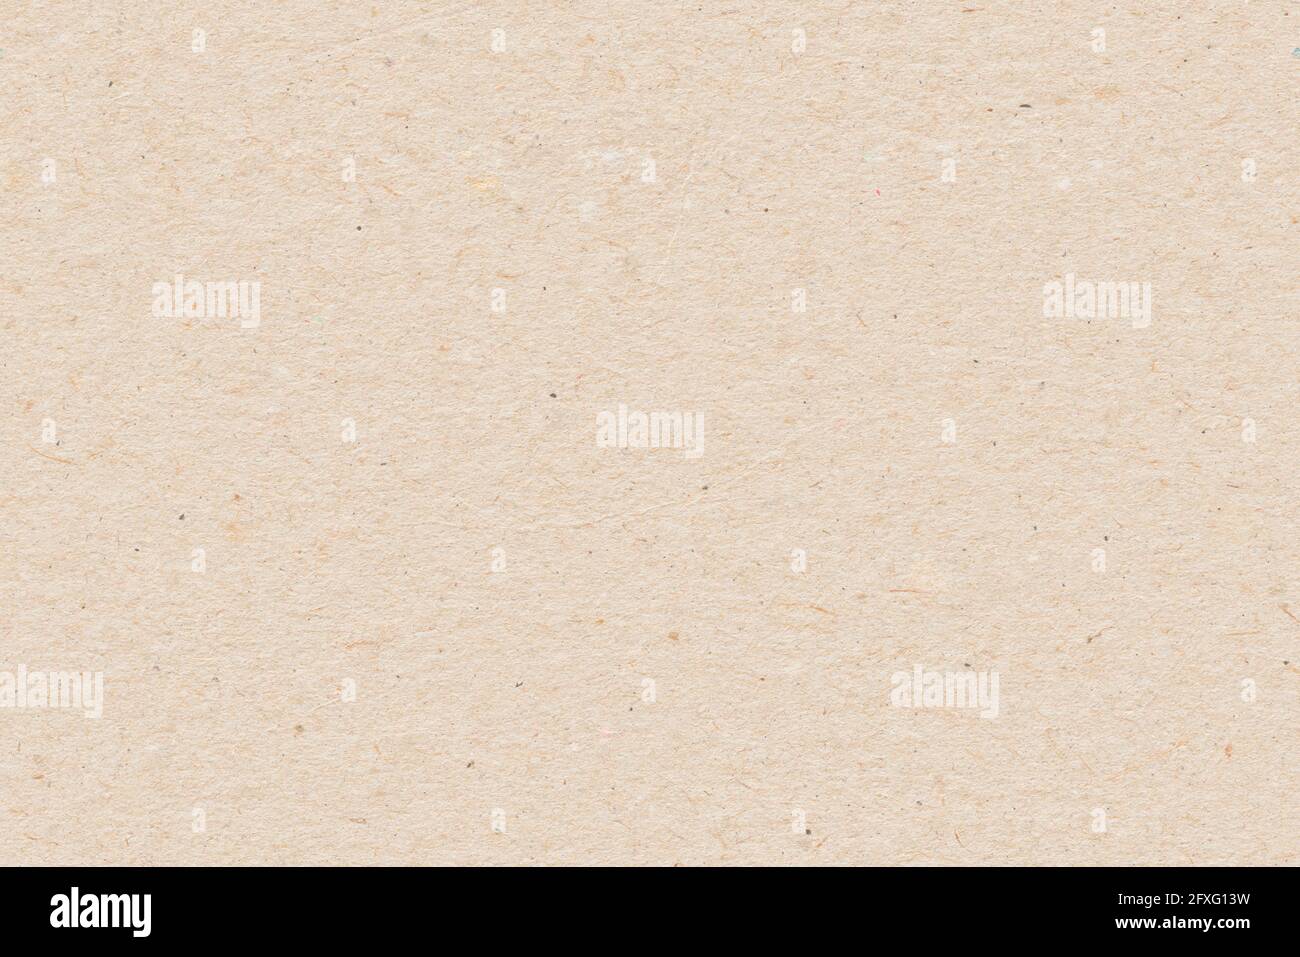 Cardboard background. Neutral flecked cardboard texture, seamless and tileable repeat pattern for an endless scrolling template Stock Photo